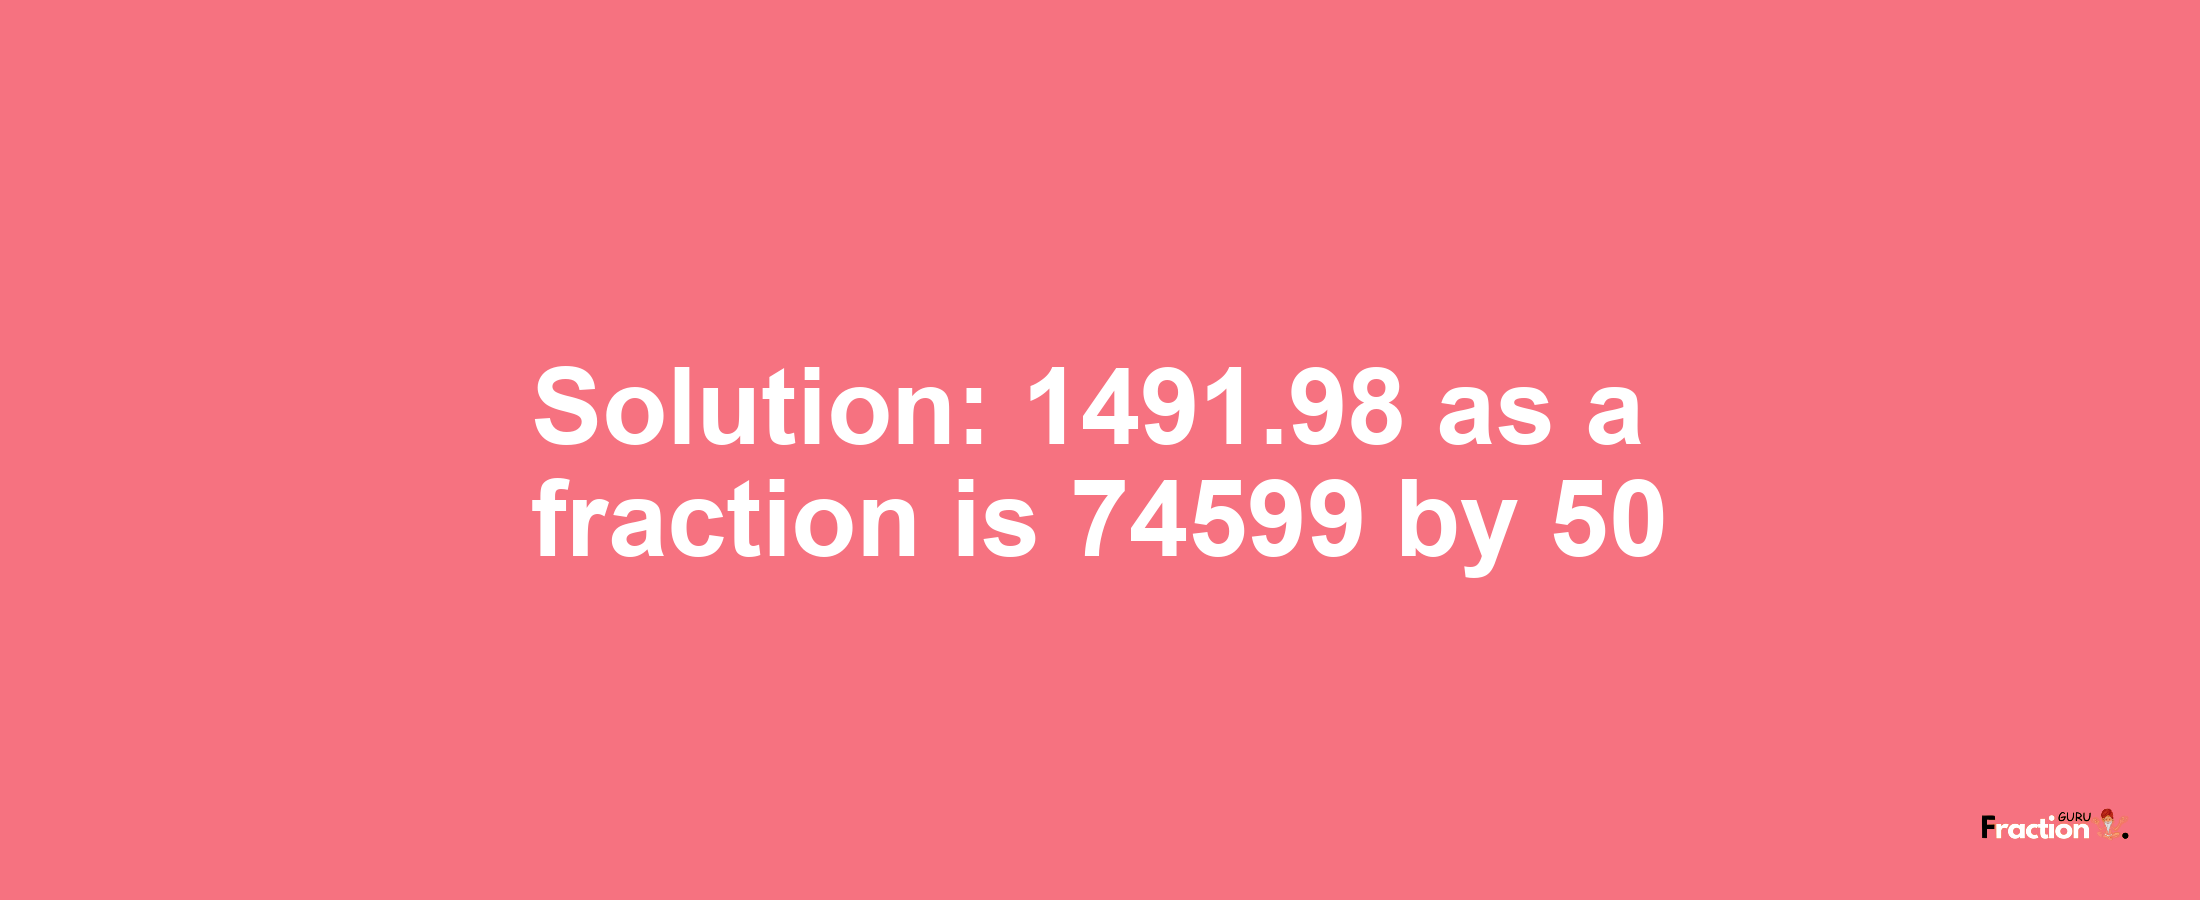 Solution:1491.98 as a fraction is 74599/50